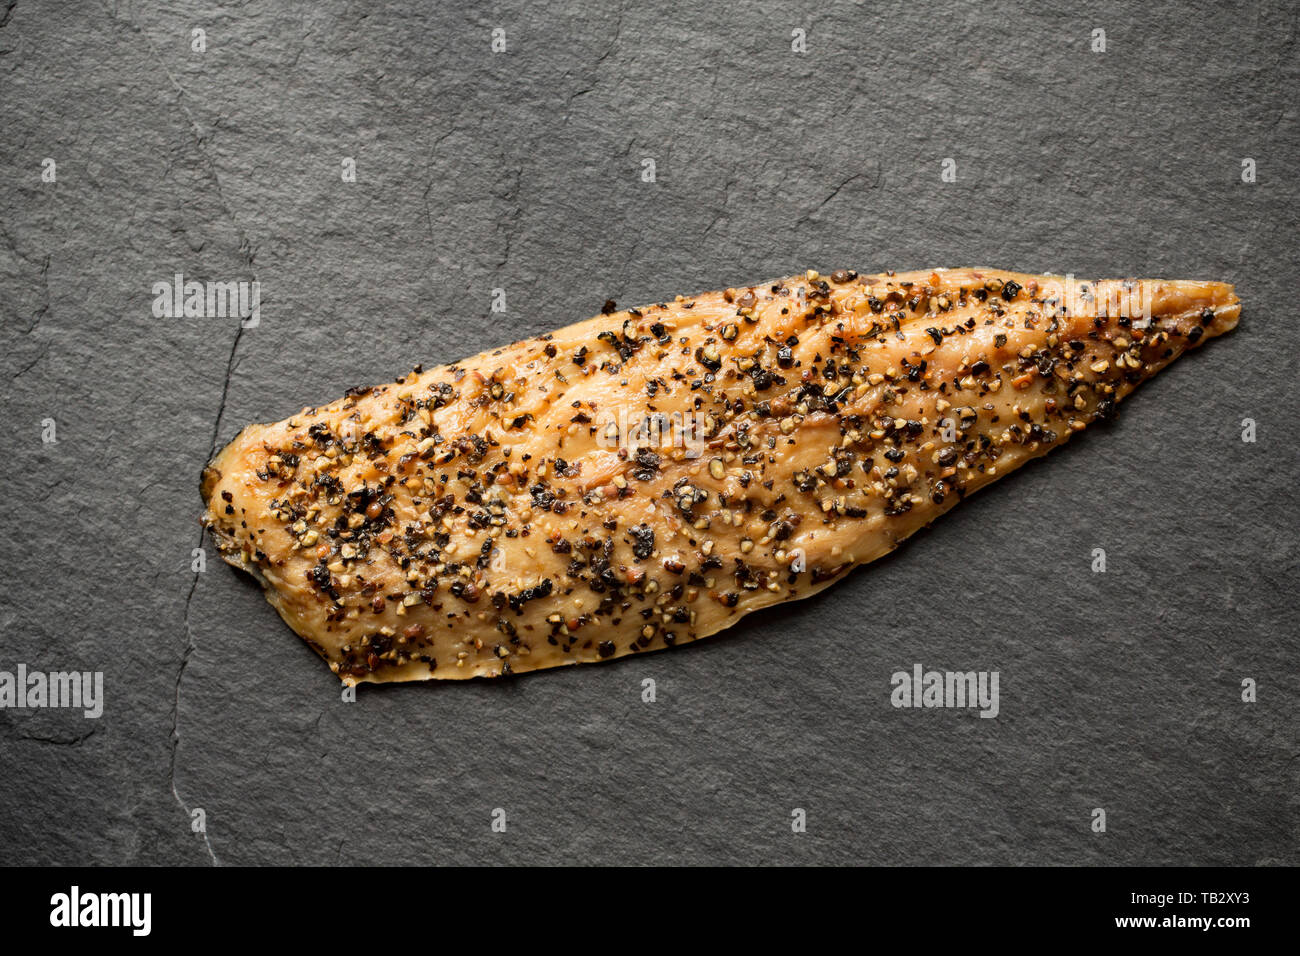 A Scottish hot smoked mackerel fillet, Scomber scombrus, with cracked black pepper bought from a supermarket in the UK. Mackerel are a source of Omega Stock Photo